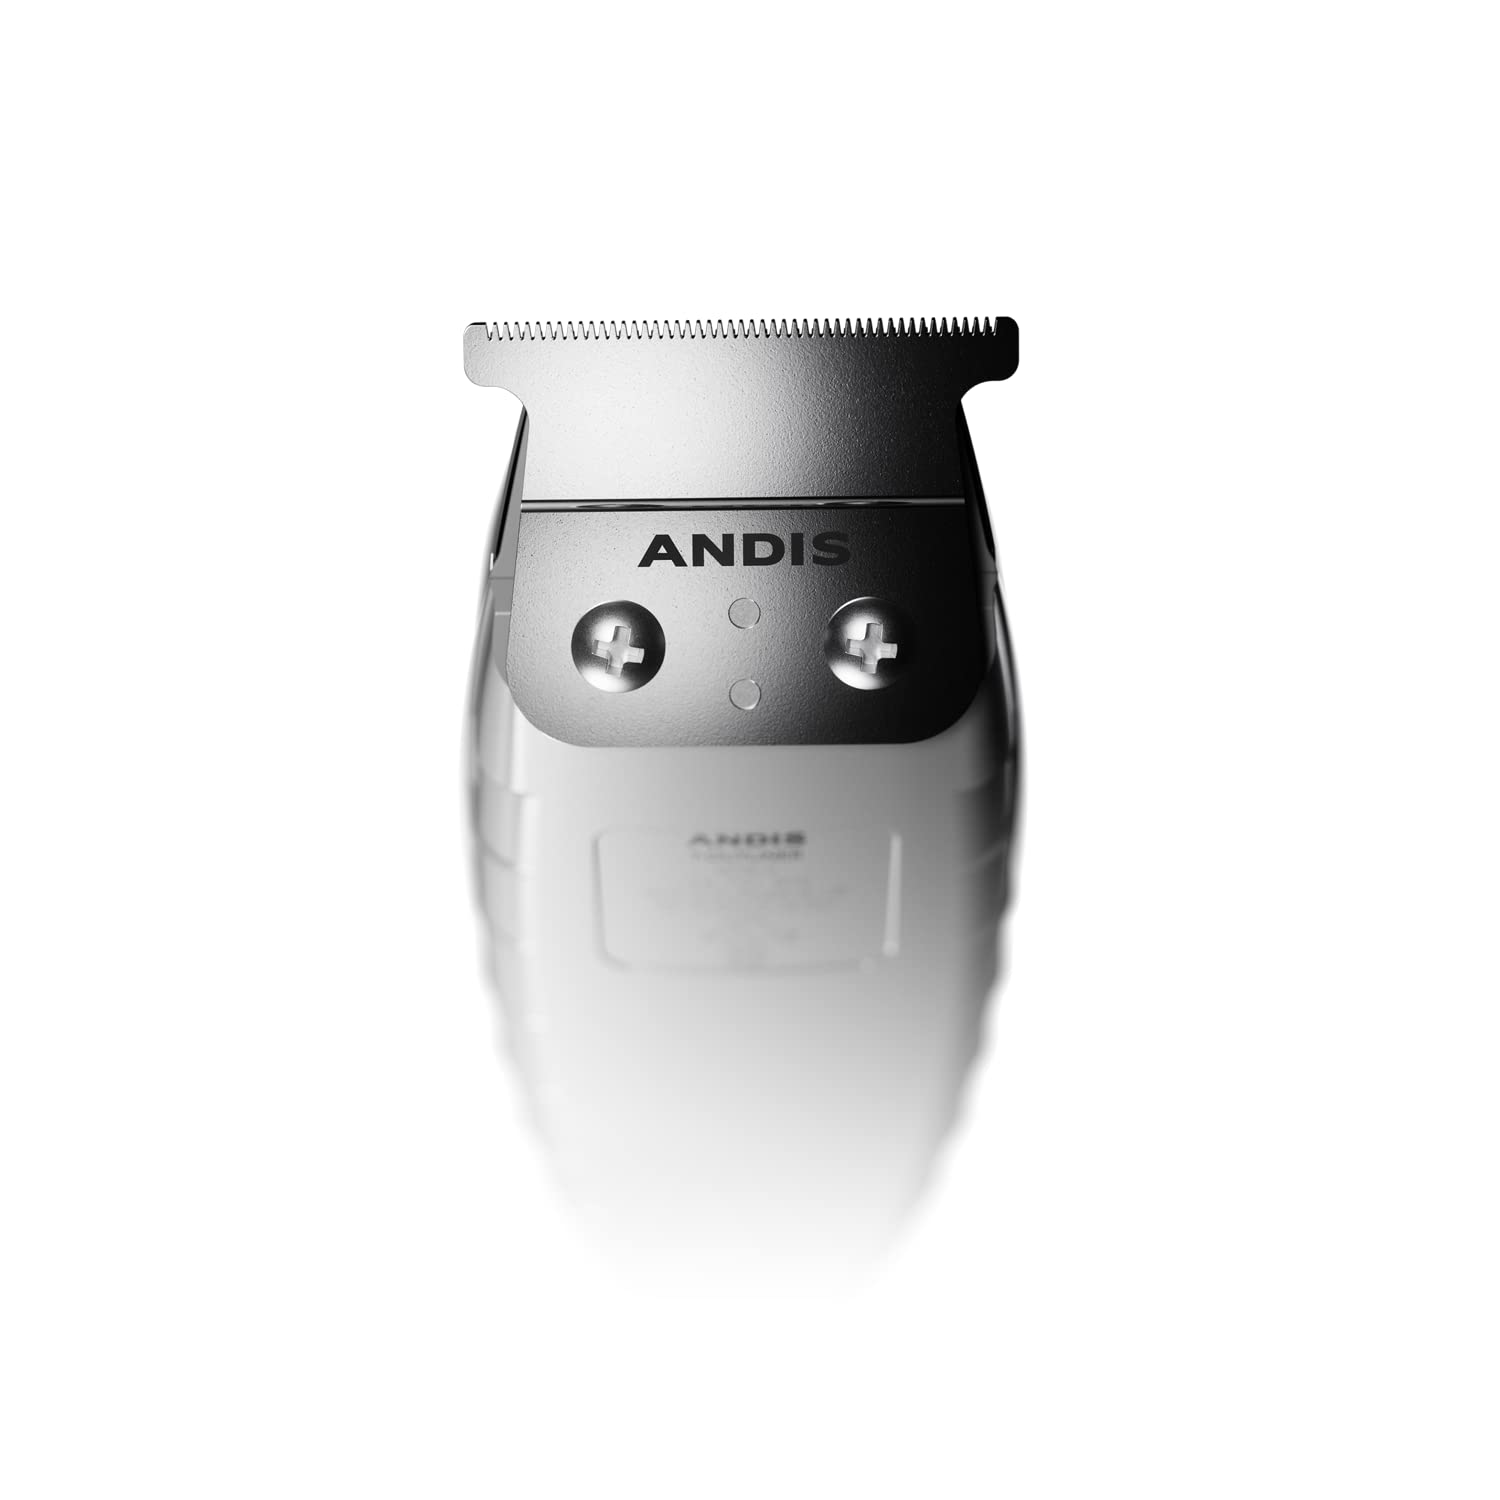 Andis 04780 Professional T-Outliner Beard & Hair Trimmer for Men with Carbon Steel T-Blade, Bump Free Technology – Corded Electric Beard Trimmer - Grey